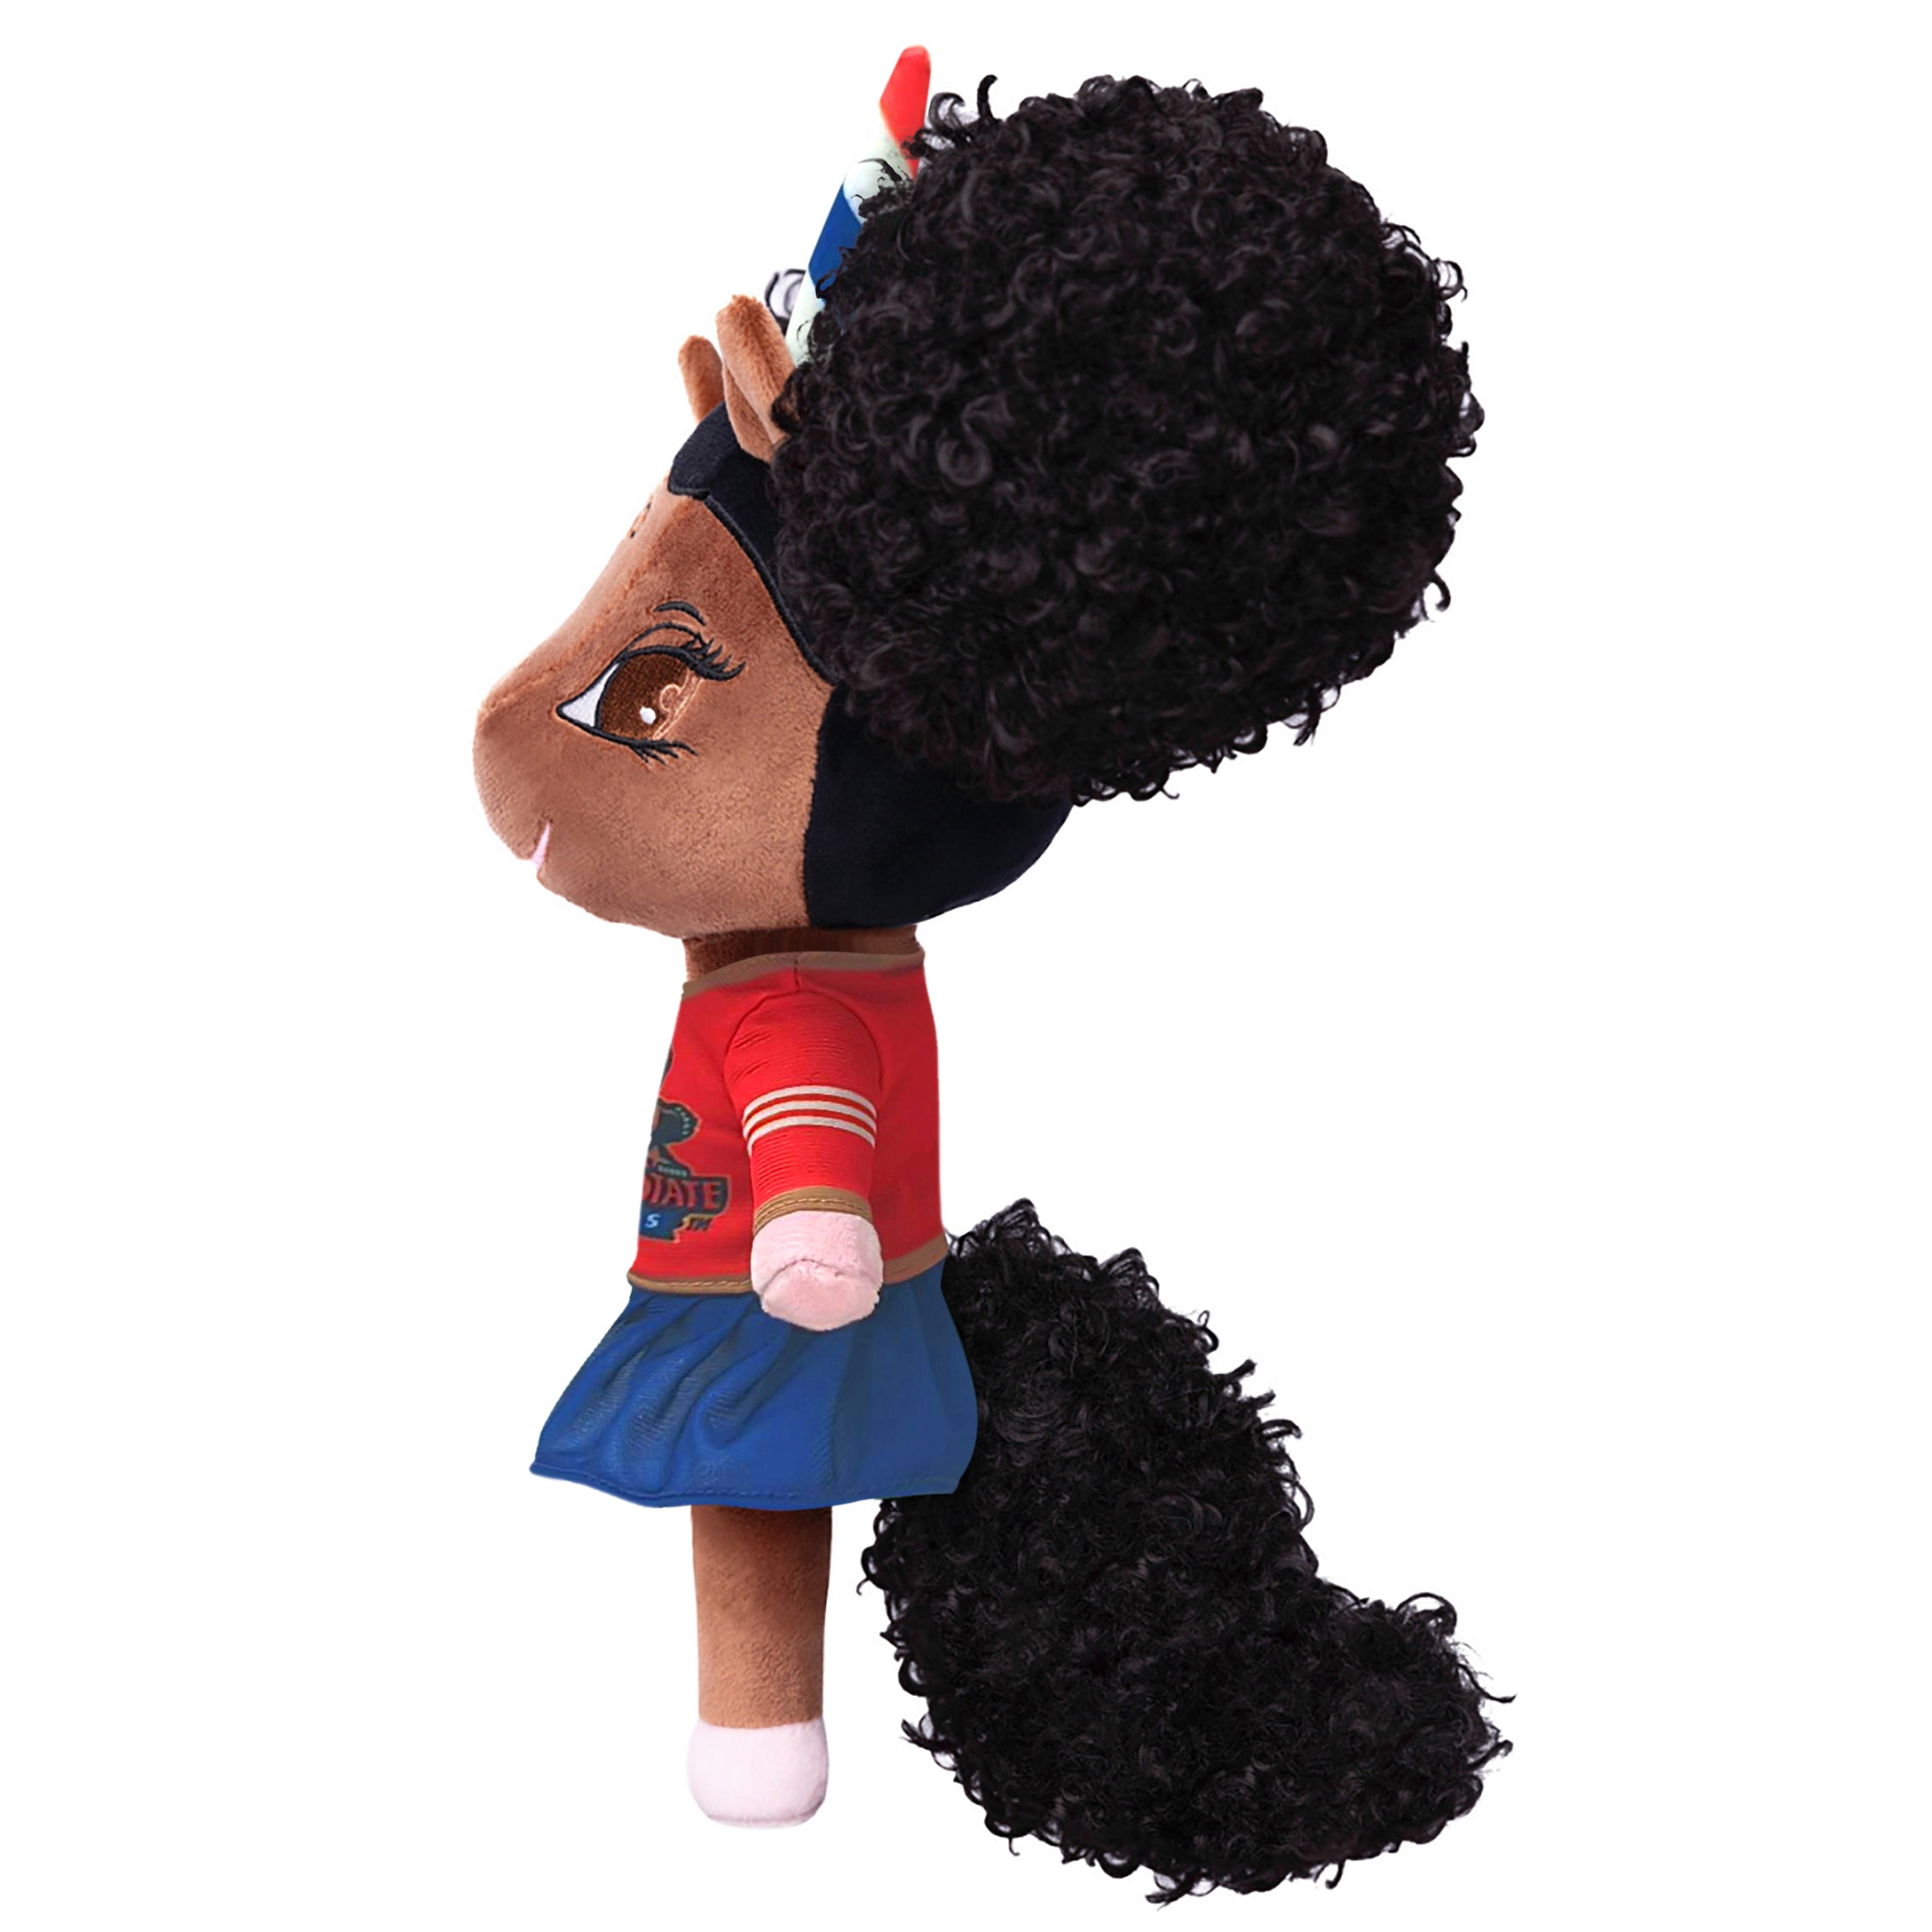 Morgan State University Unicorn Doll with Afro Puffs - 14 inch